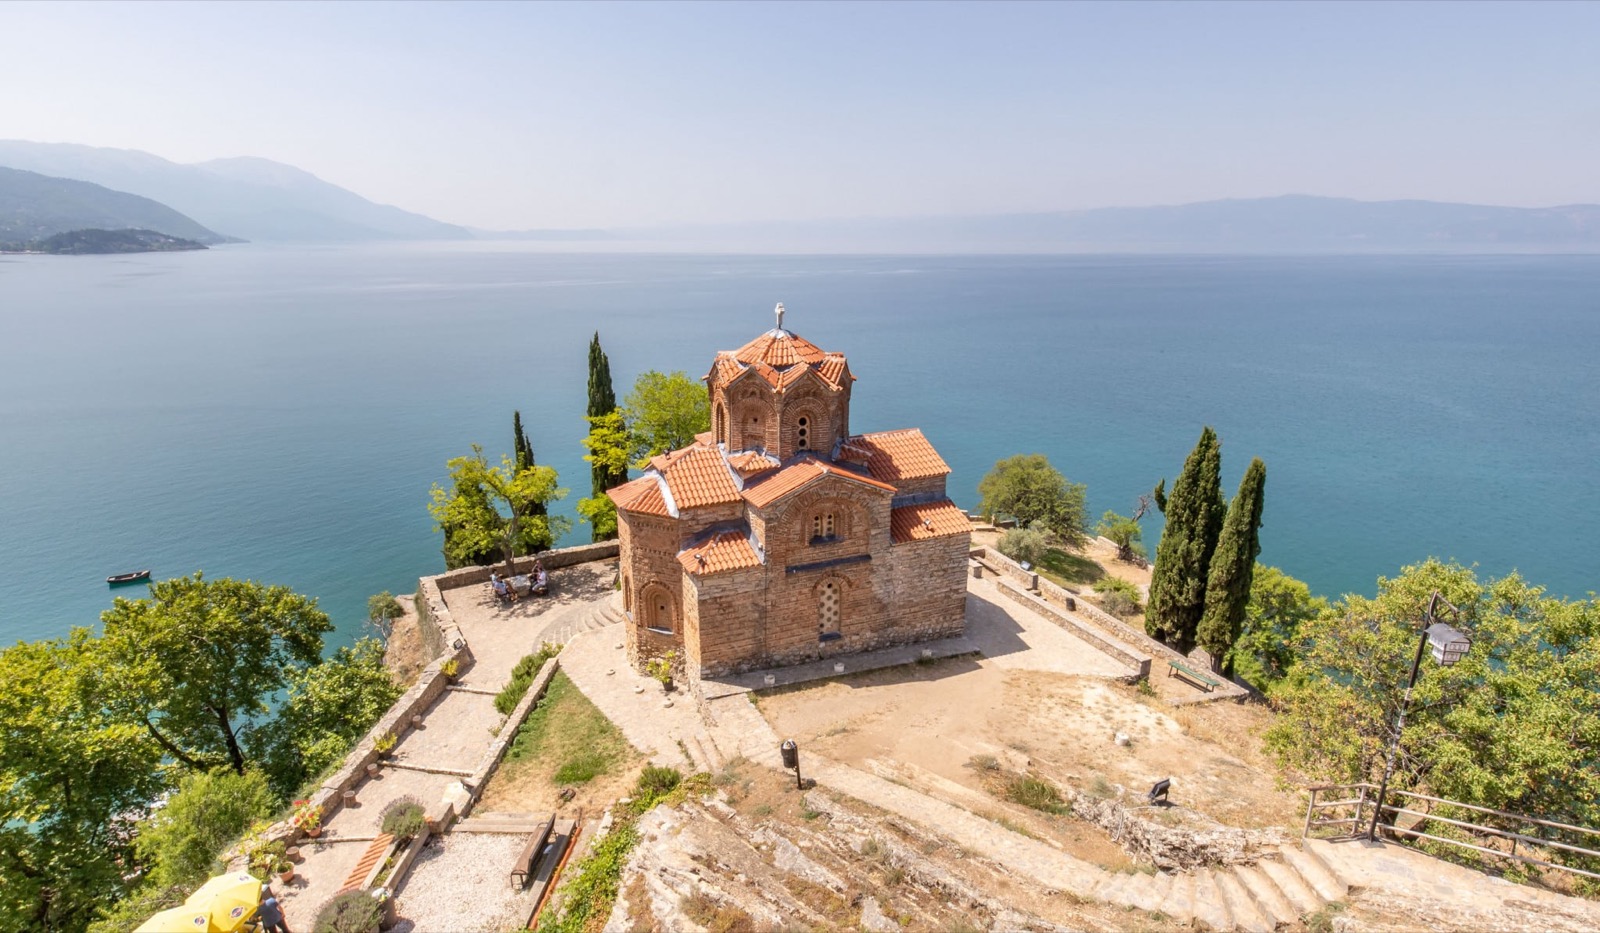 If You Get 20/25 on This Geography True or False Test, You’re Smarter Than 95% Of People Ohrid, North Macedonia